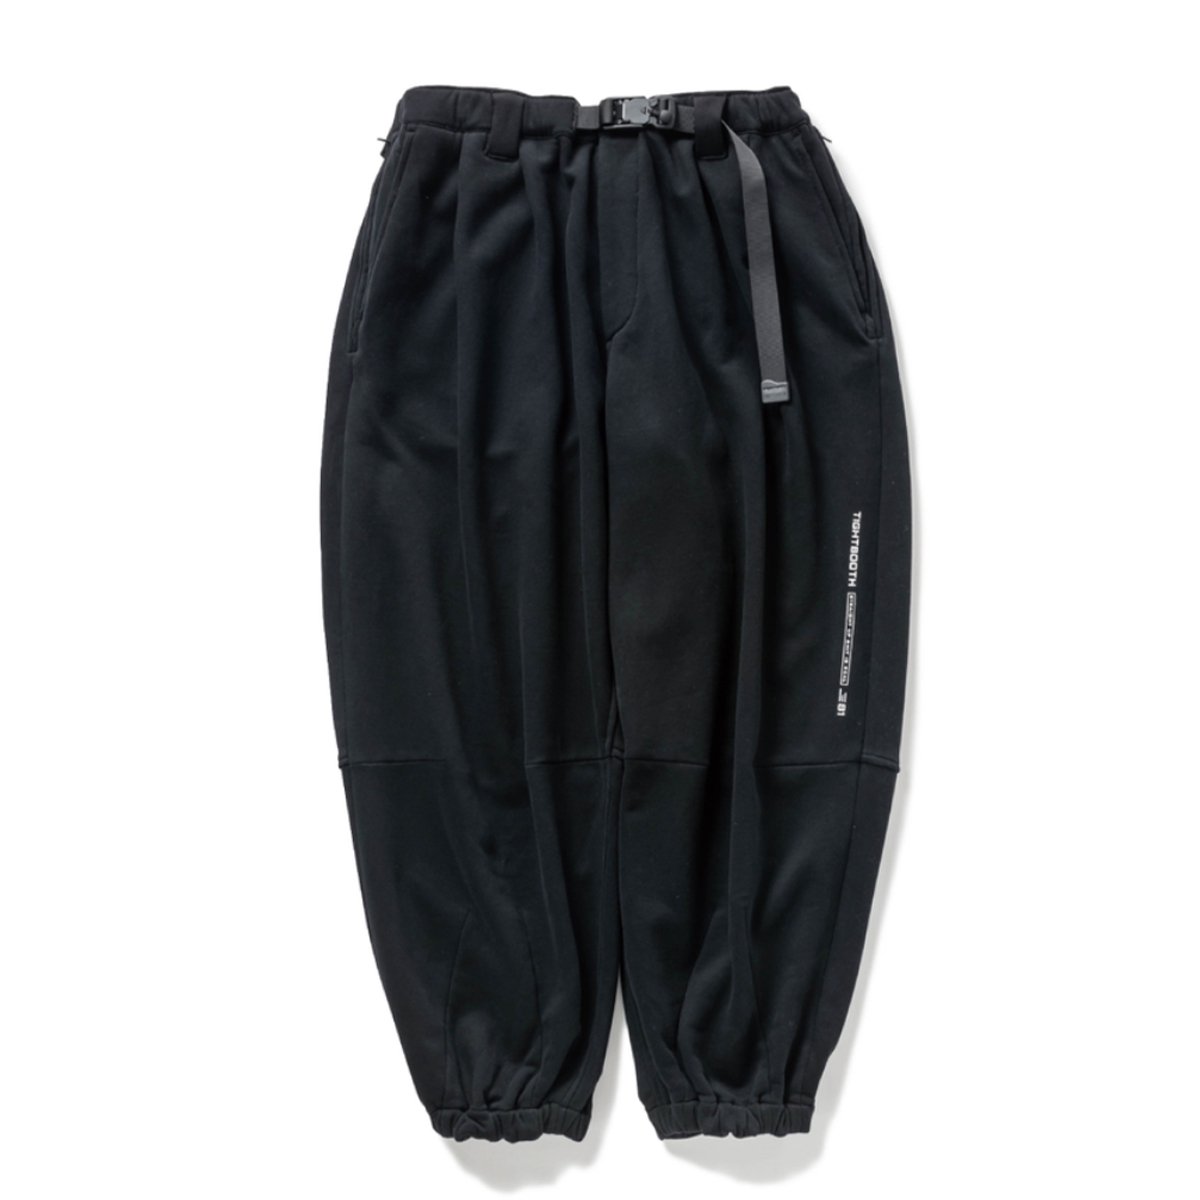 <img class='new_mark_img1' src='https://img.shop-pro.jp/img/new/icons8.gif' style='border:none;display:inline;margin:0px;padding:0px;width:auto;' />:【TIGHTBOOTH】Pyramid Swat Balloon Pants (Black)
                          </a>
            <span class=